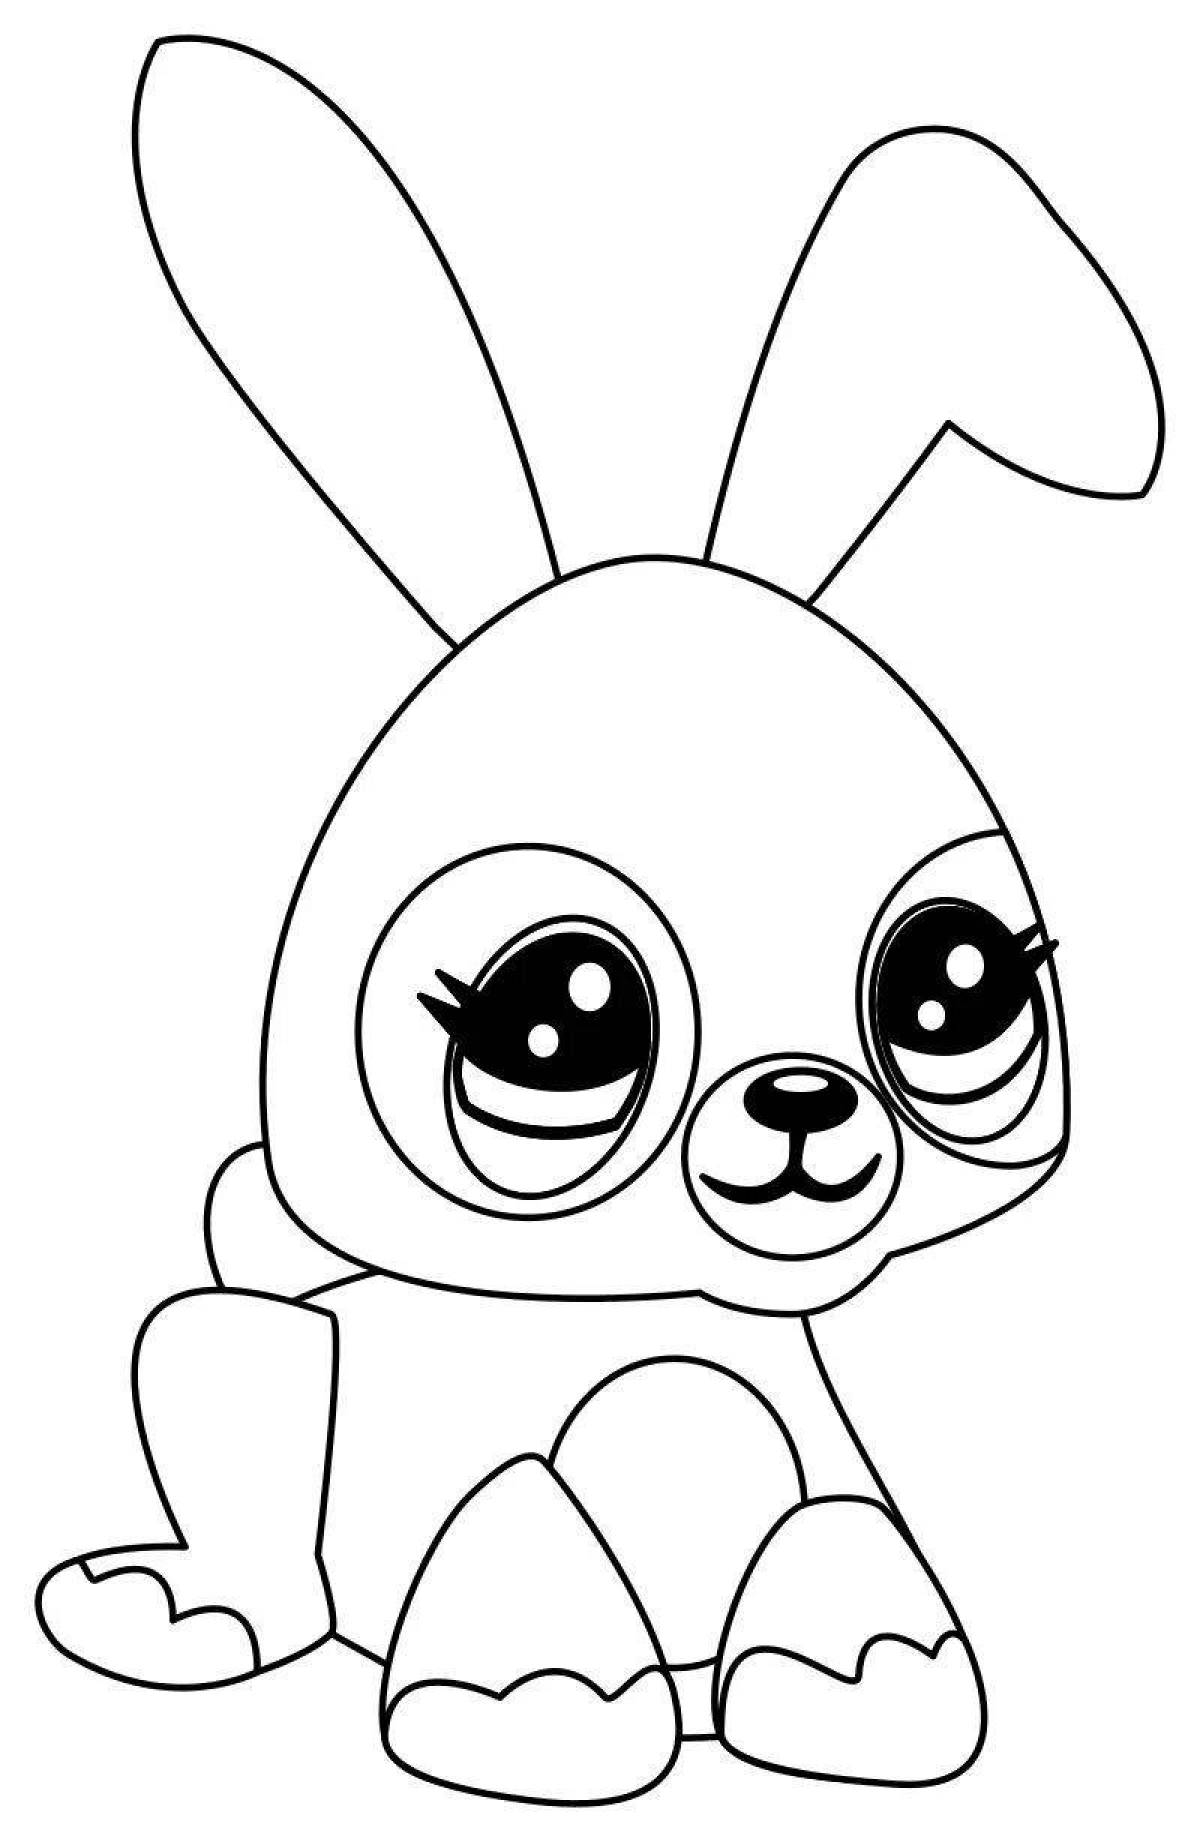 Sunny rabbit coloring page for girls